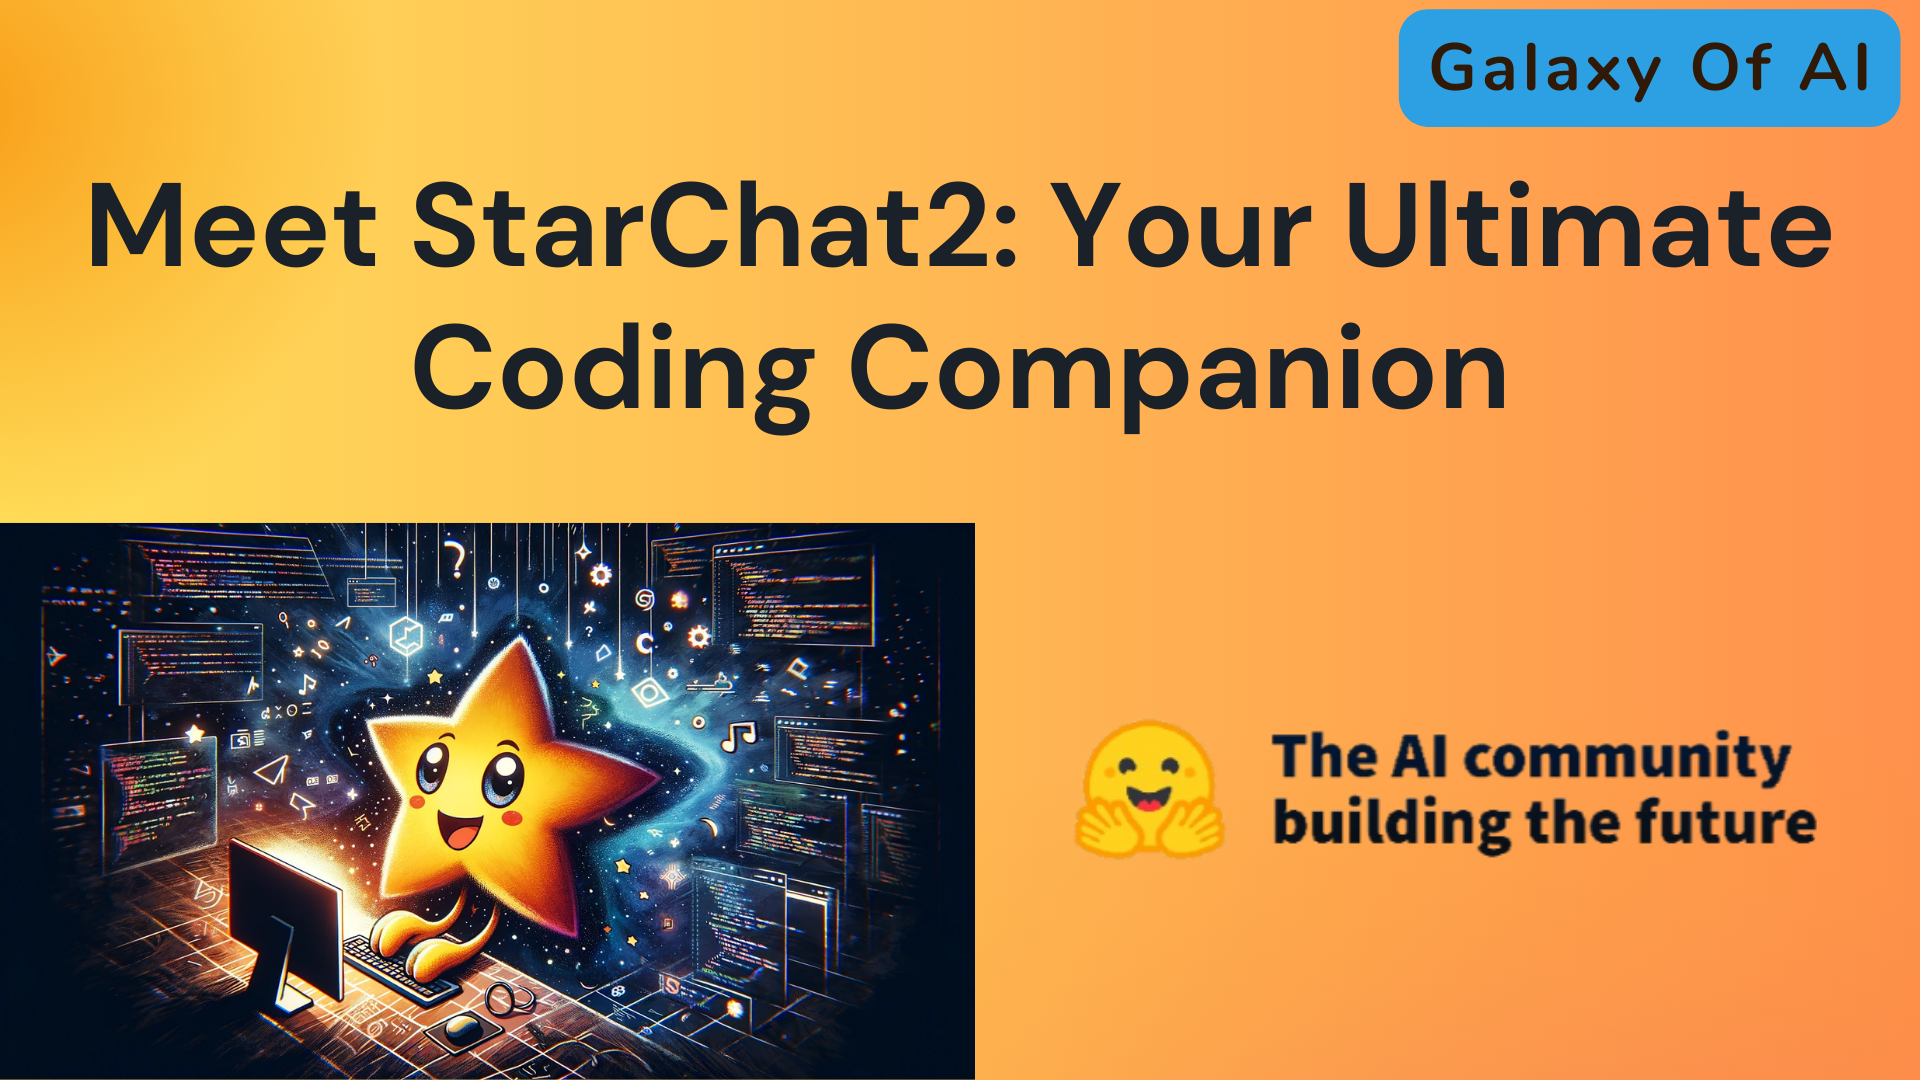 Meet StarChat2: Your Ultimate Coding Companion